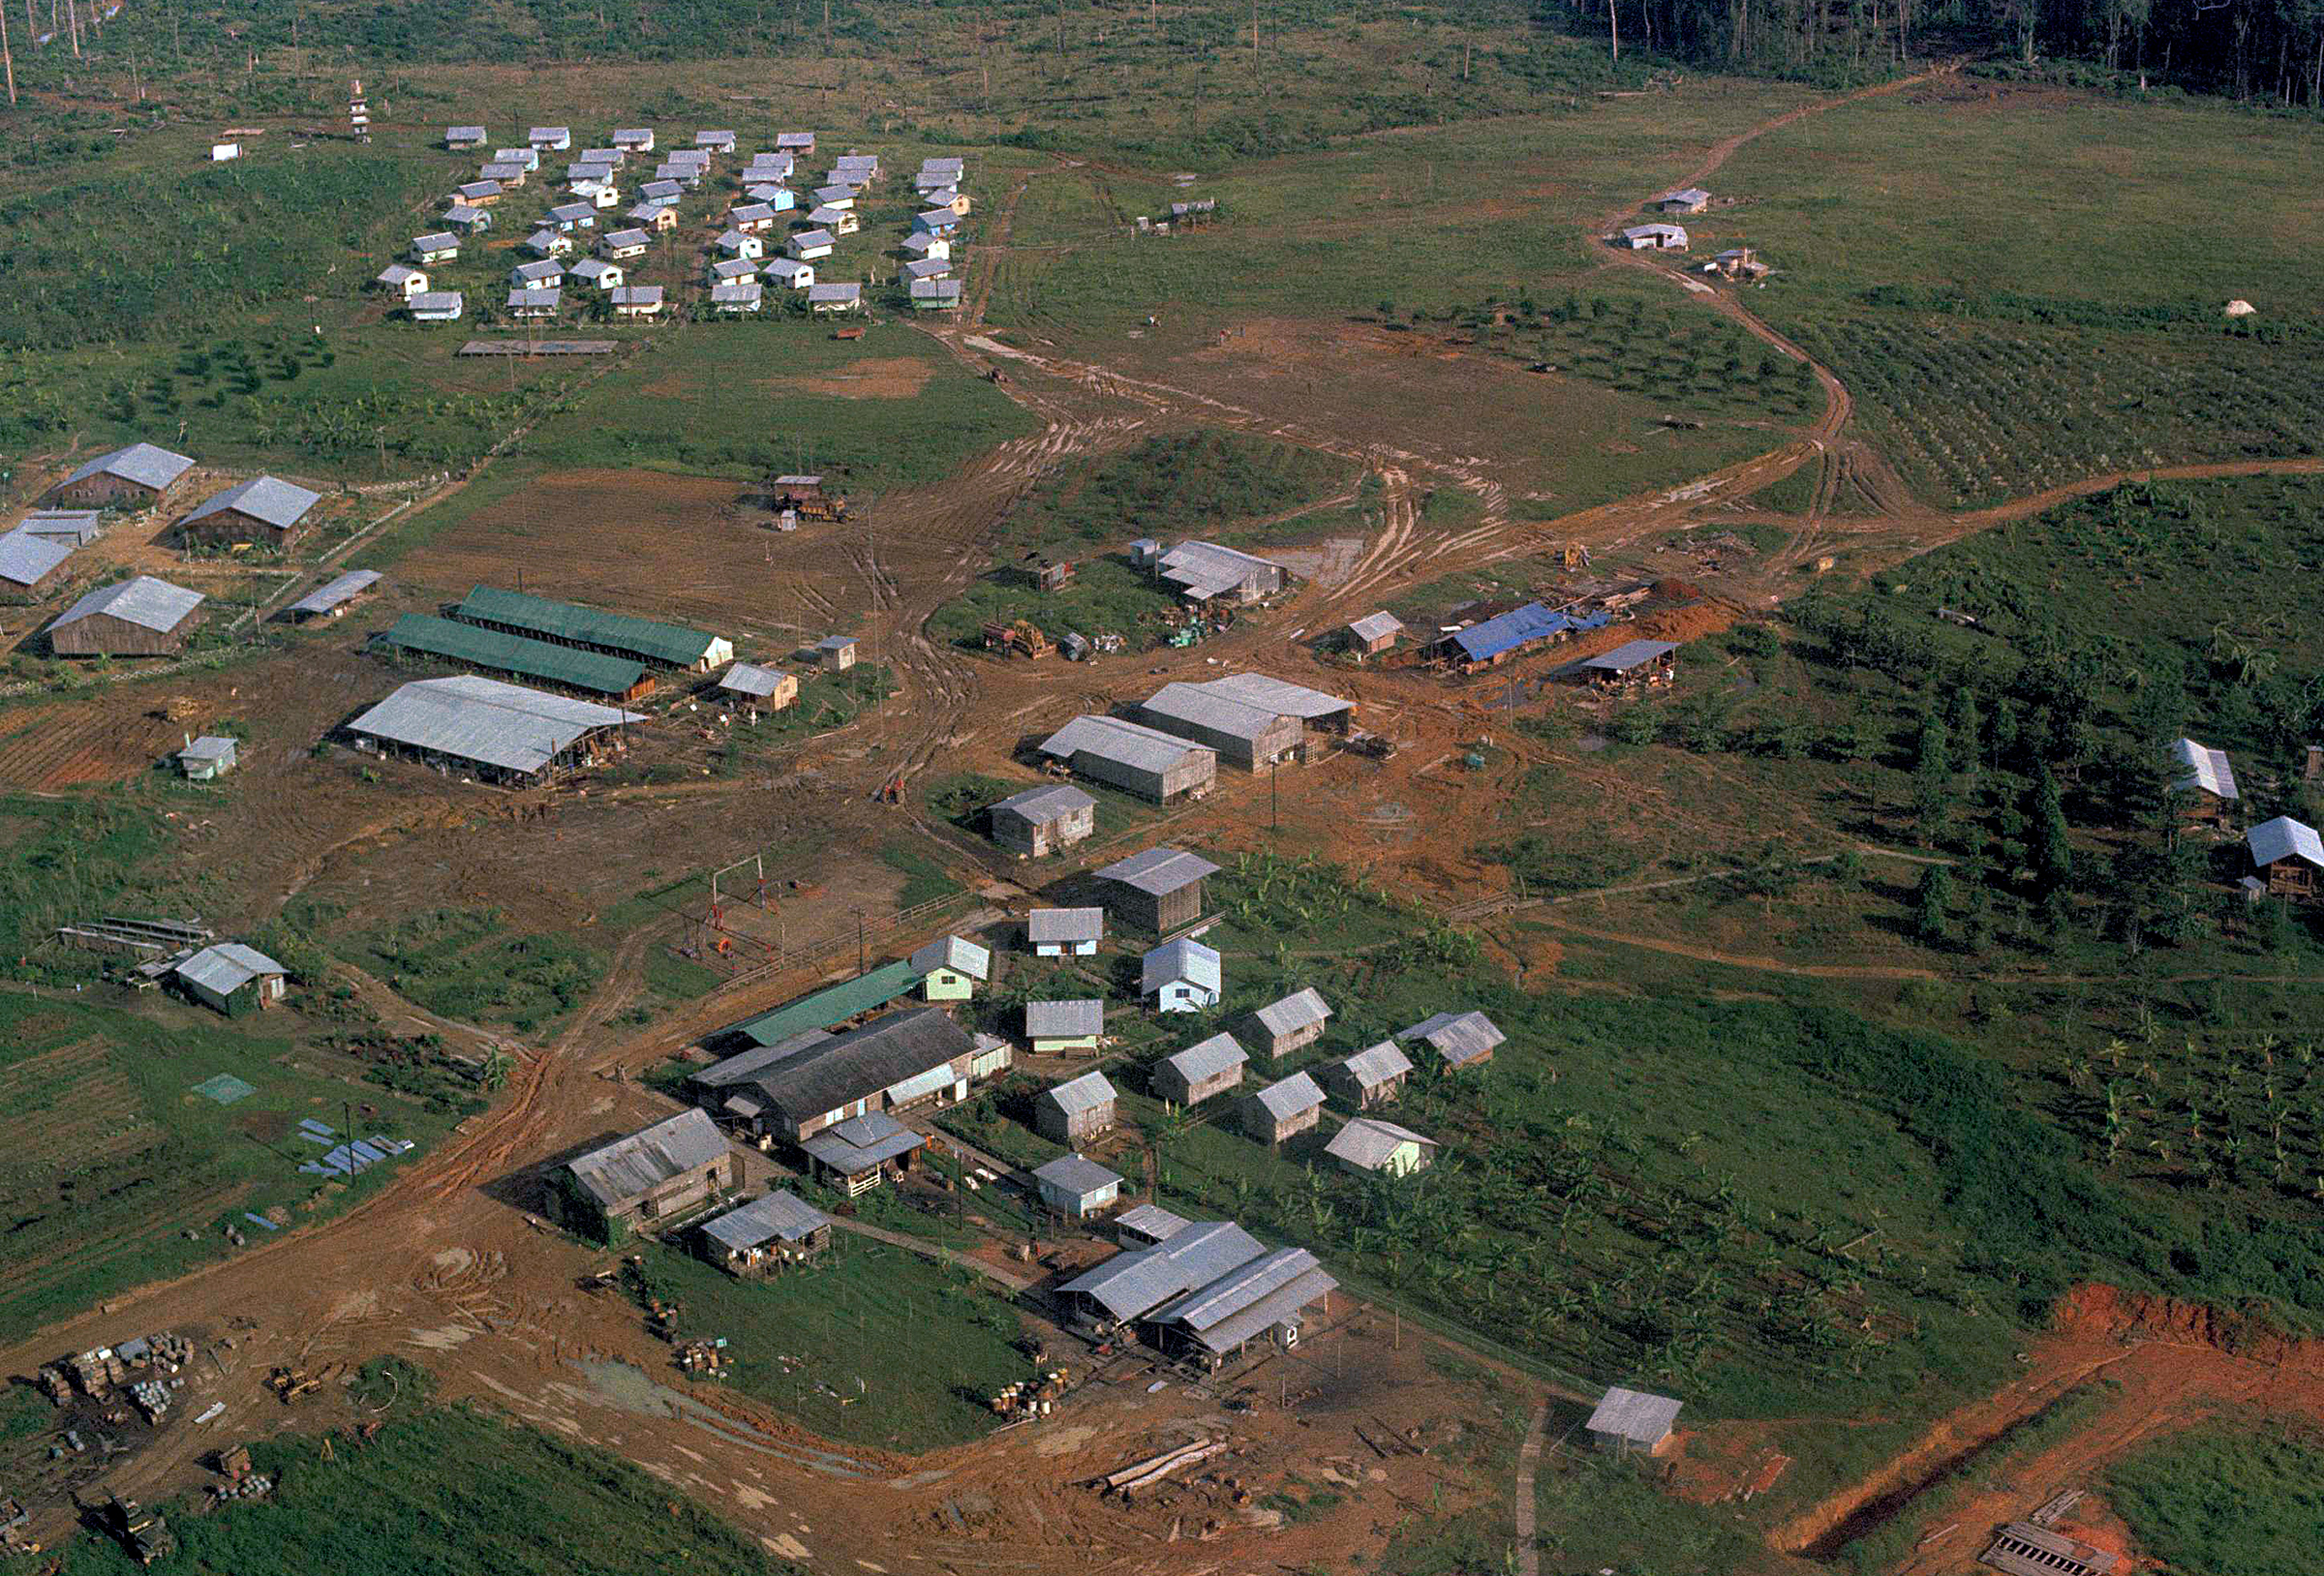 An aerial view of the Peoples Temple compound in Jonestown, Guyana in November 1978.